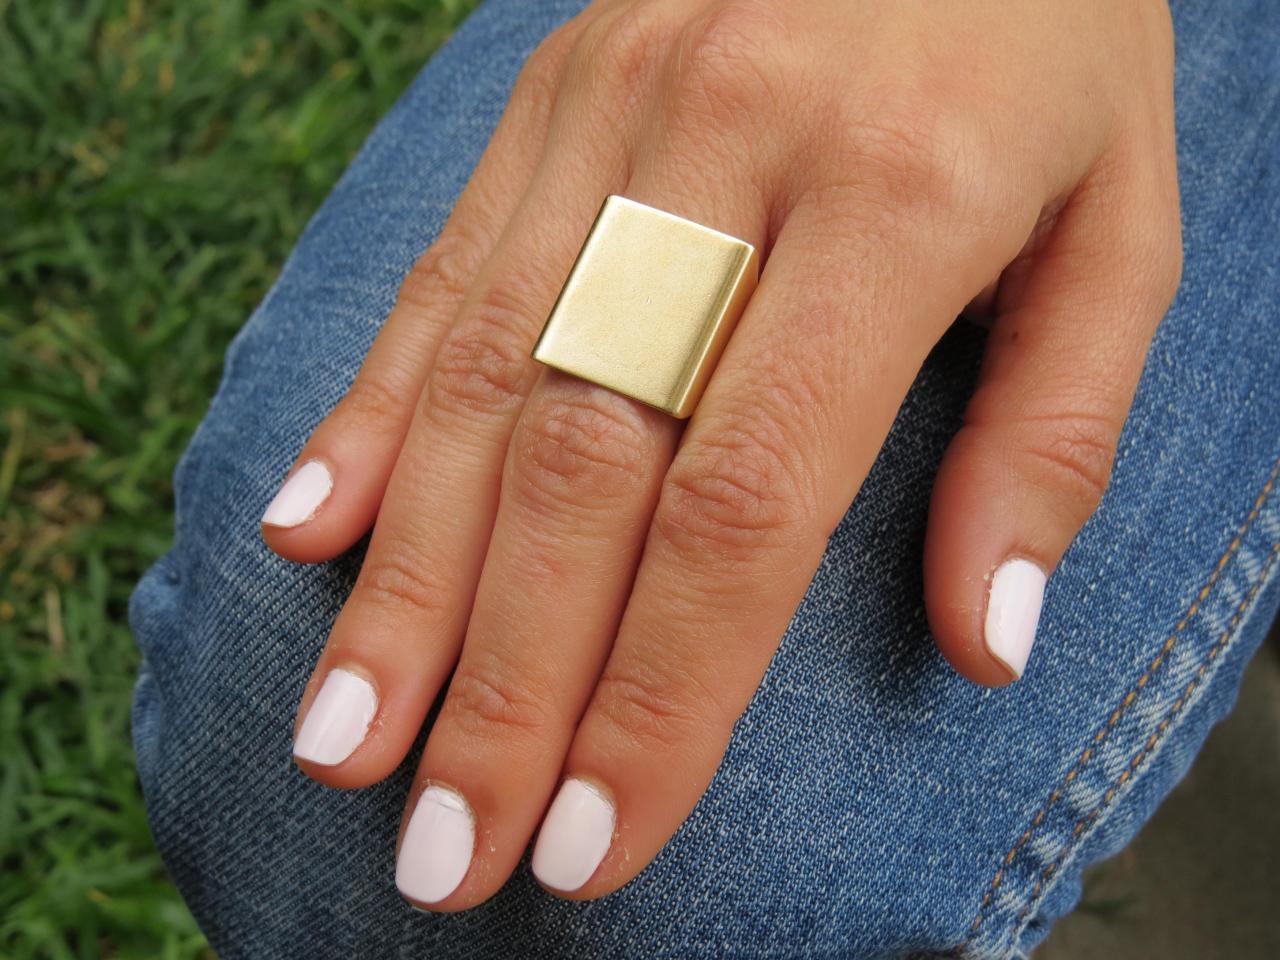 Gold Ring - Wide band ring, Adjustable ring, Simple big gold ring, Statement gold ring, Gold accessories, Square gold ring, Gold jewelry